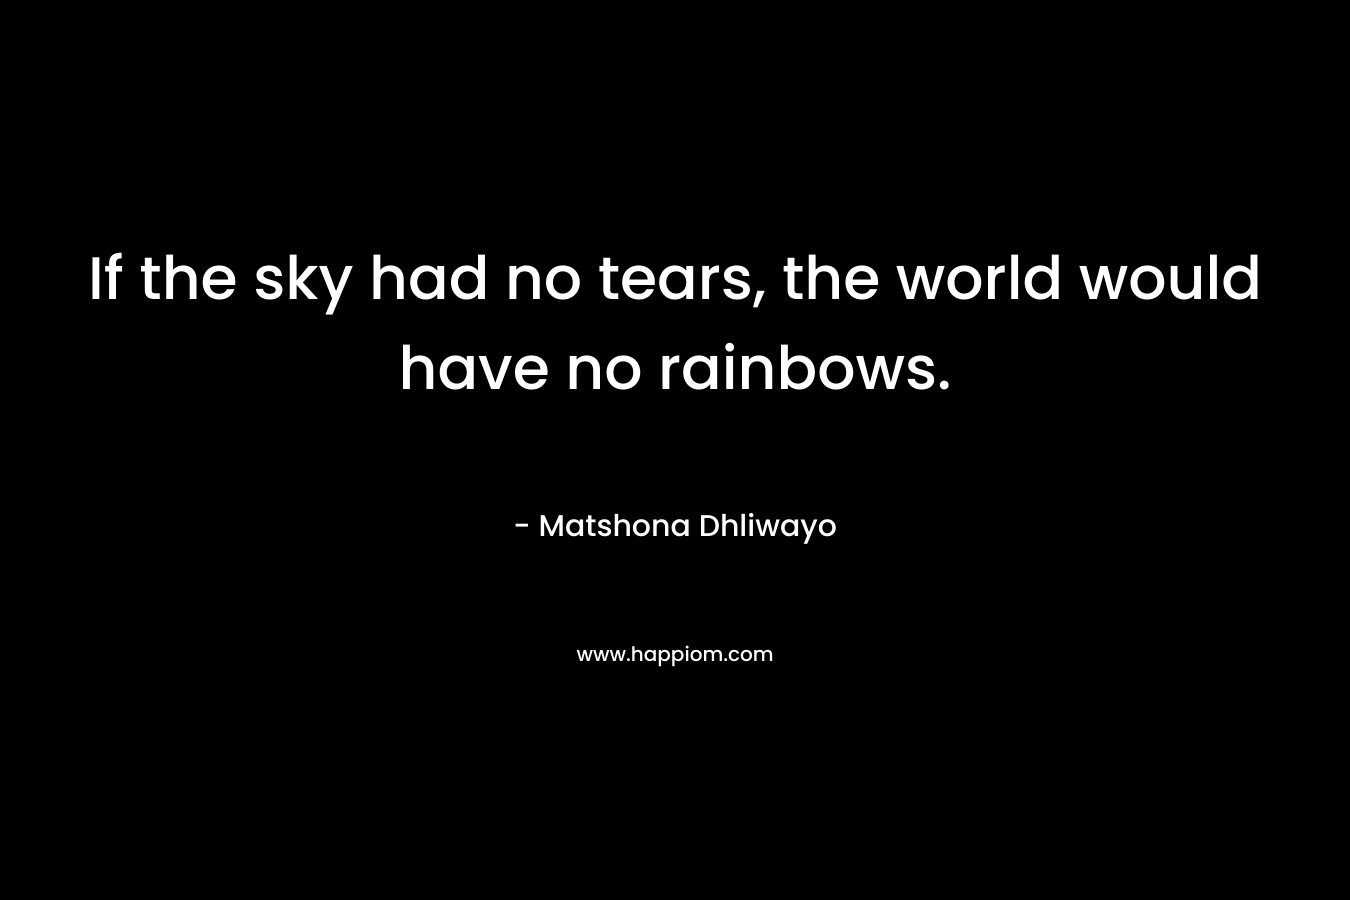 If the sky had no tears, the world would have no rainbows.